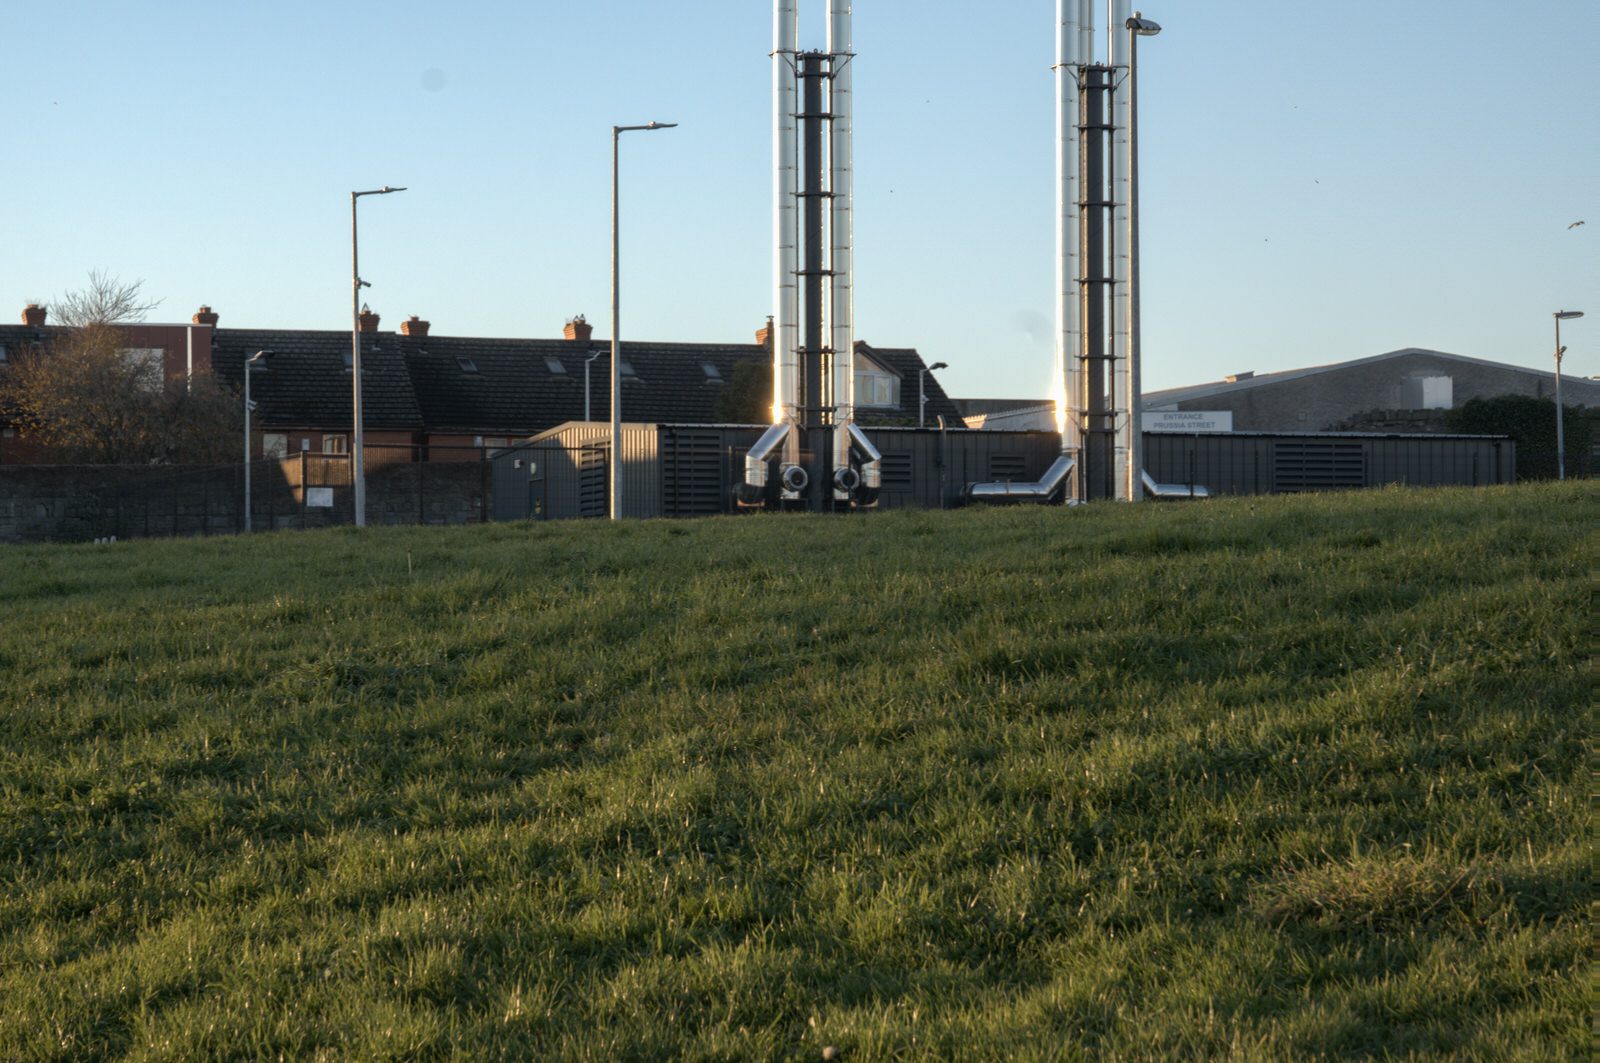 A SUNNY BUT VERY COLD DAY AT THE GRANGEGORMAN UNIVERSITY CAMPUS 015